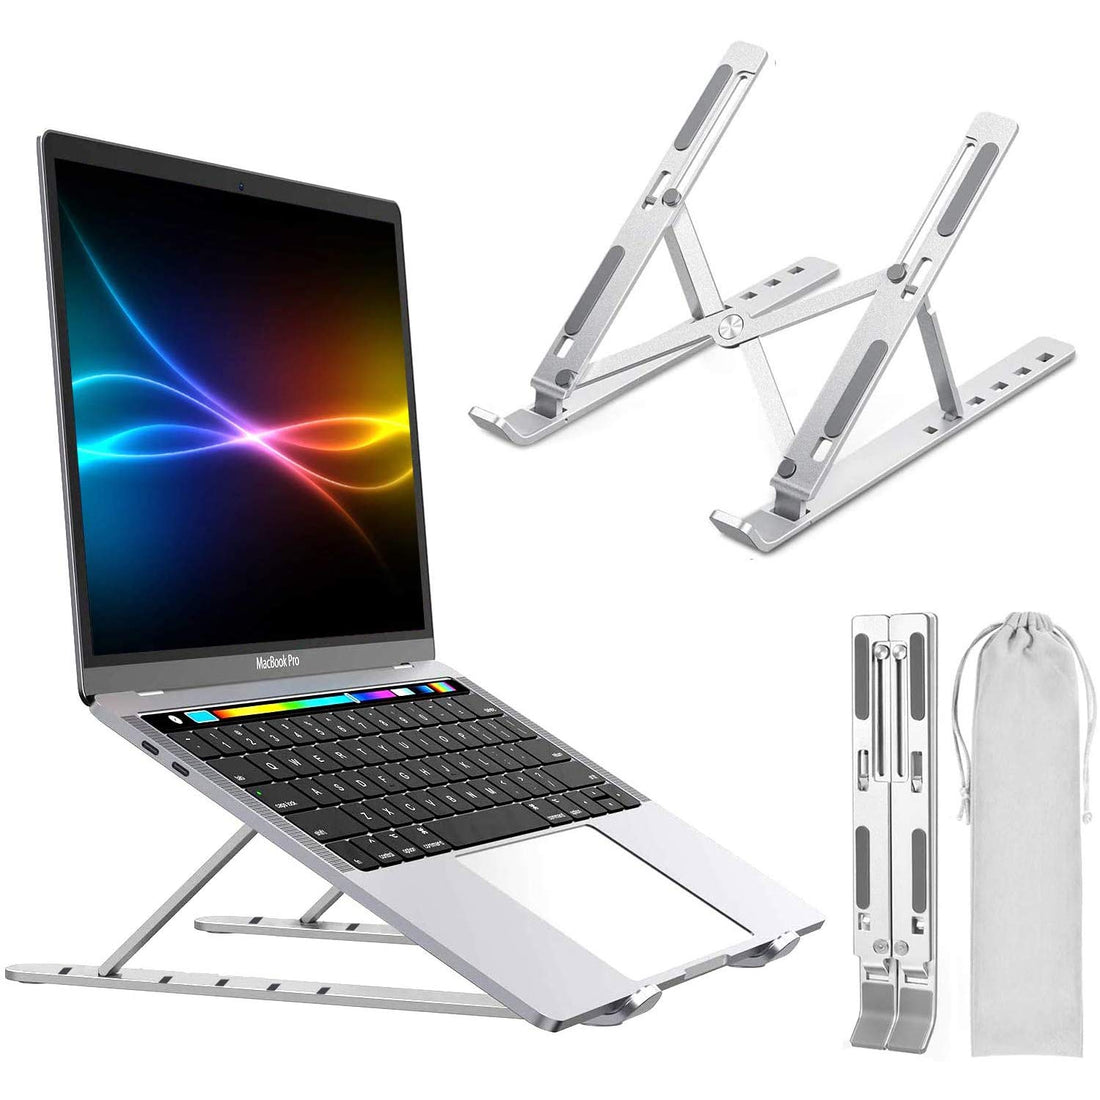 CLAW Portable Laptop Stand (Silver)